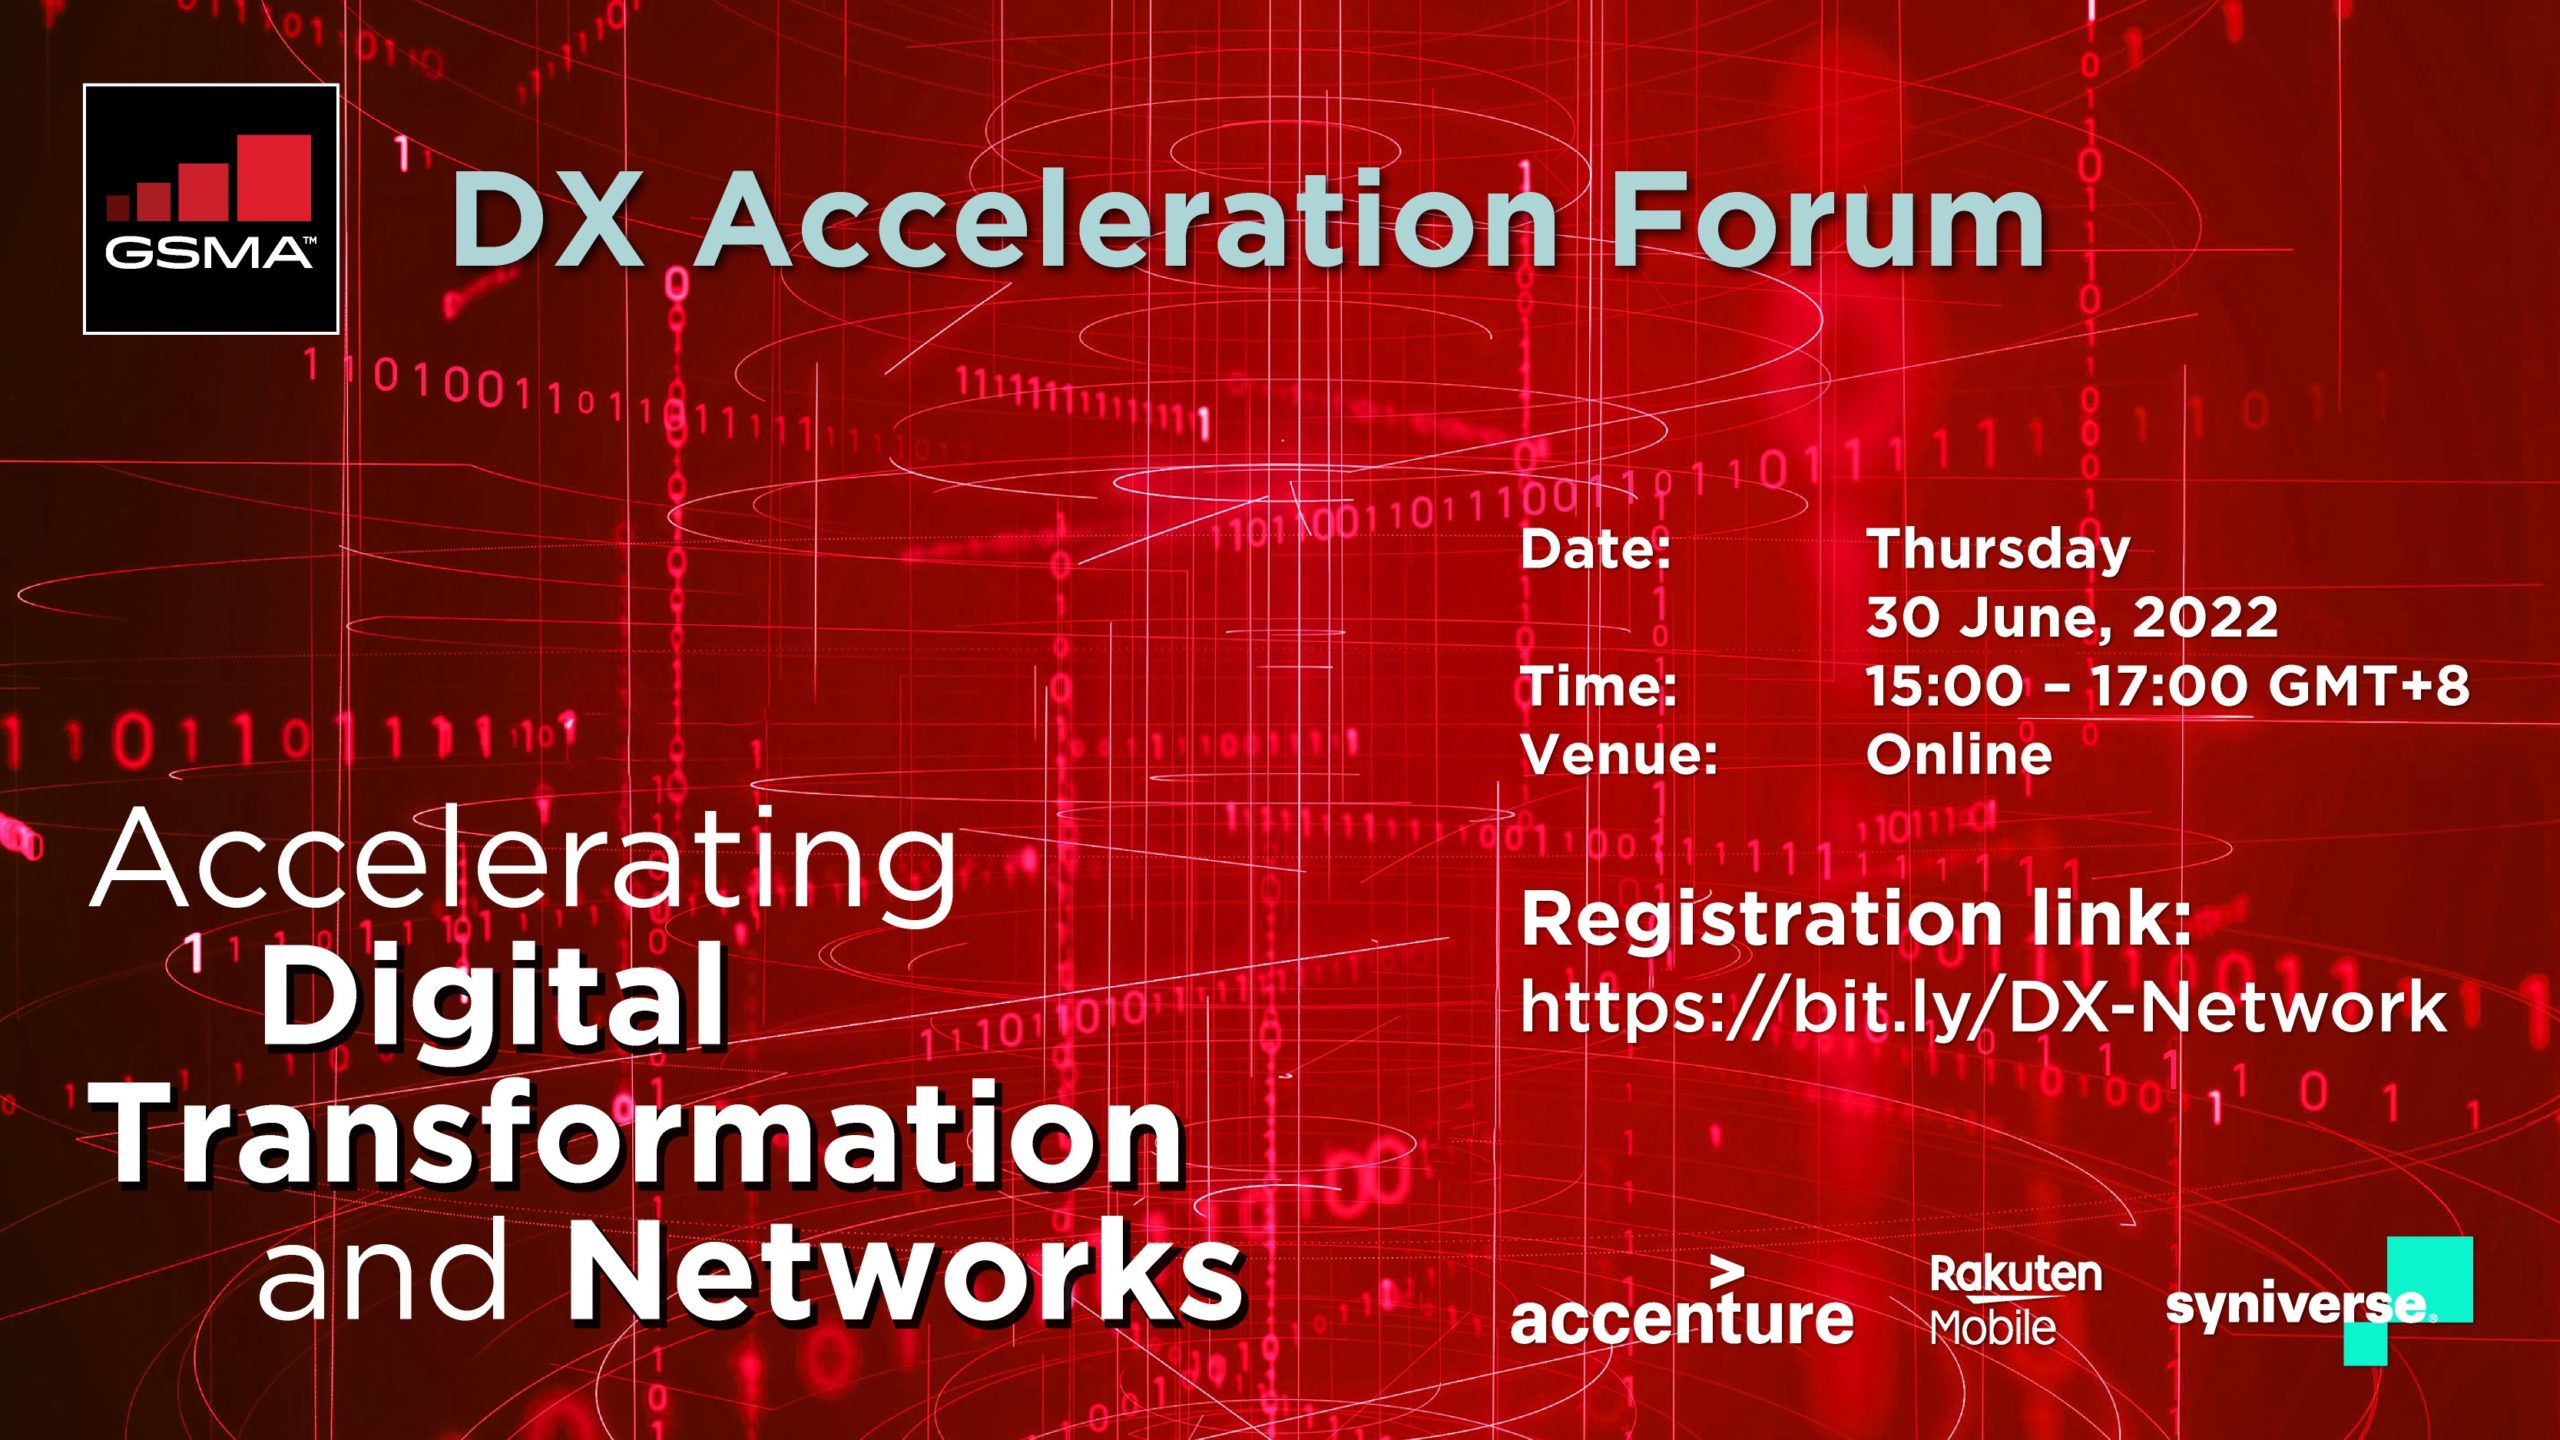 Accelerating Digital Transformation and Networks – by GSMA DX Acceleration Forum